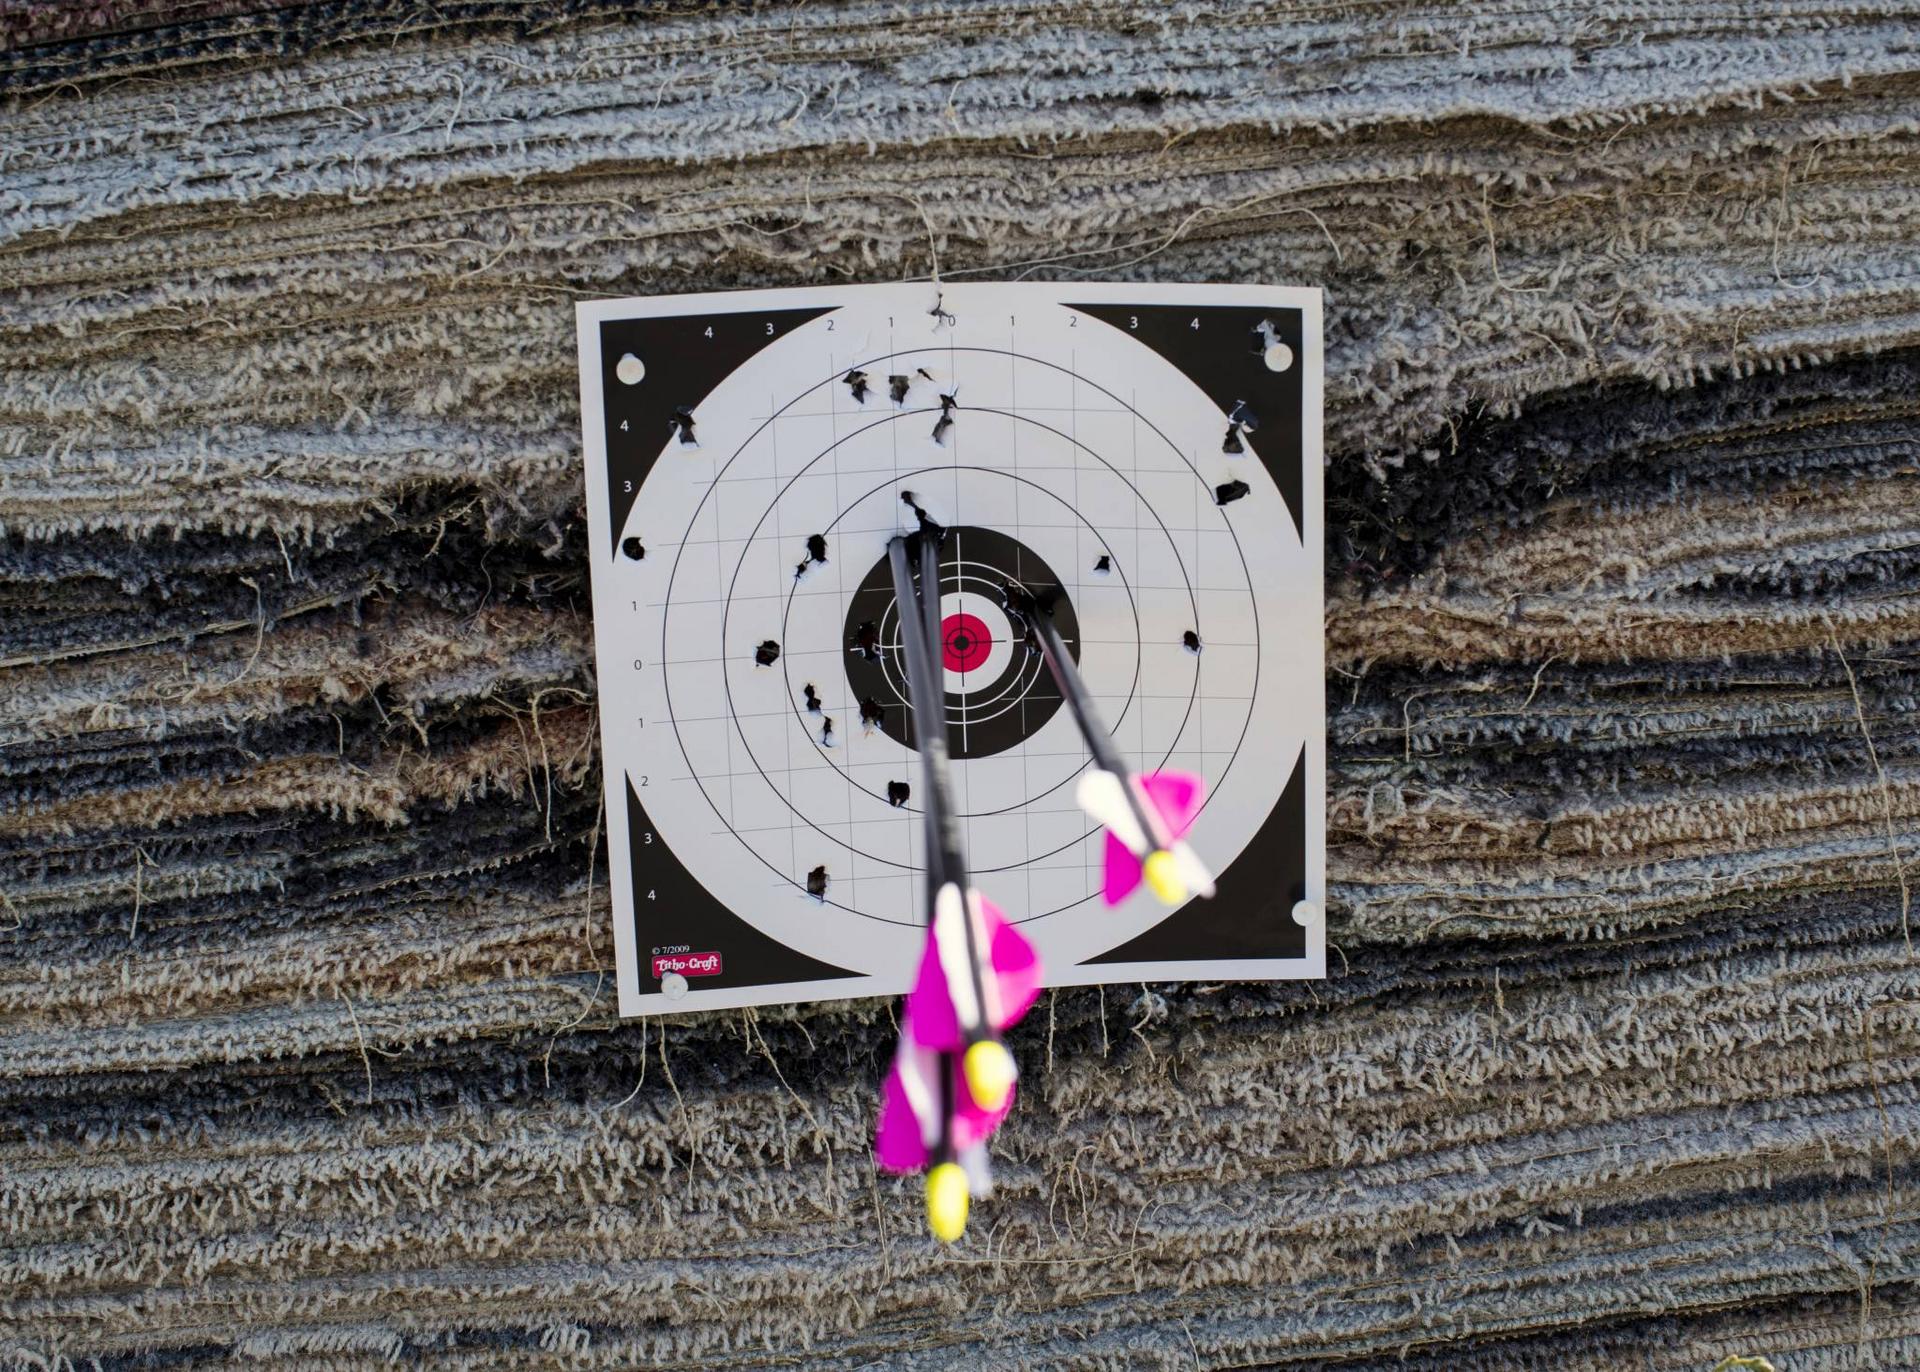 mike_christensen_7-26-2017_archery_target_and_arrows_at_Lee_Kay_Public_Shooting_Range.jpg